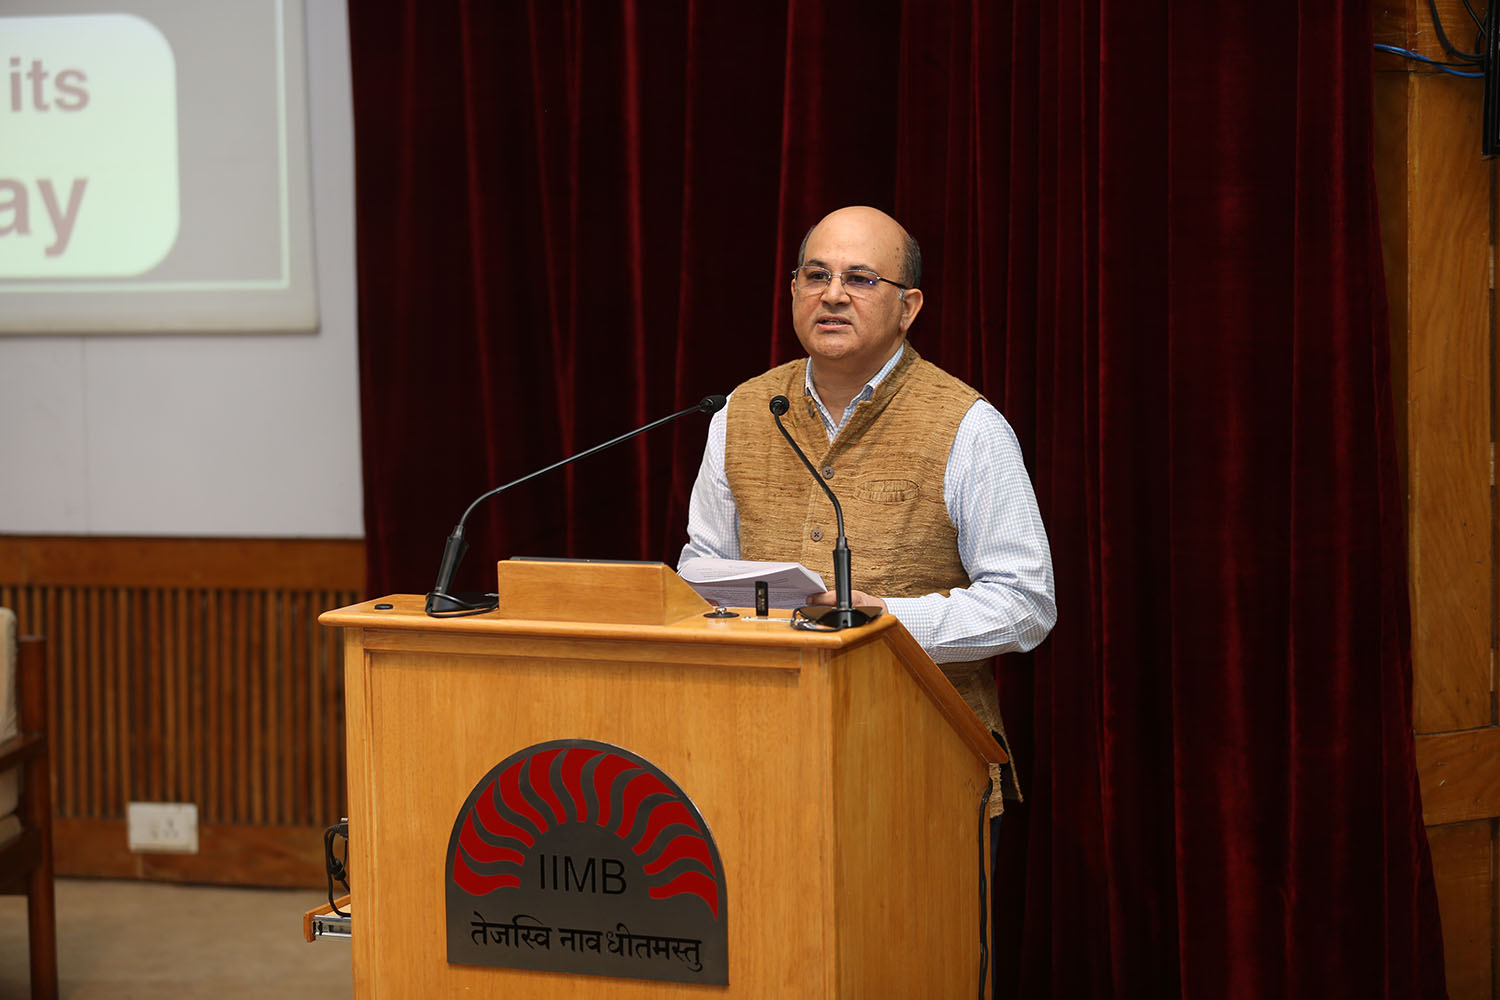 Prof. Rishikesha T Krishnan, Director, IIMB, shares the highlights of the Institute’s achievements in the year gone by and invites Ms Madhabi Puri-Buch to deliver the 49th Foundation Day lecture.